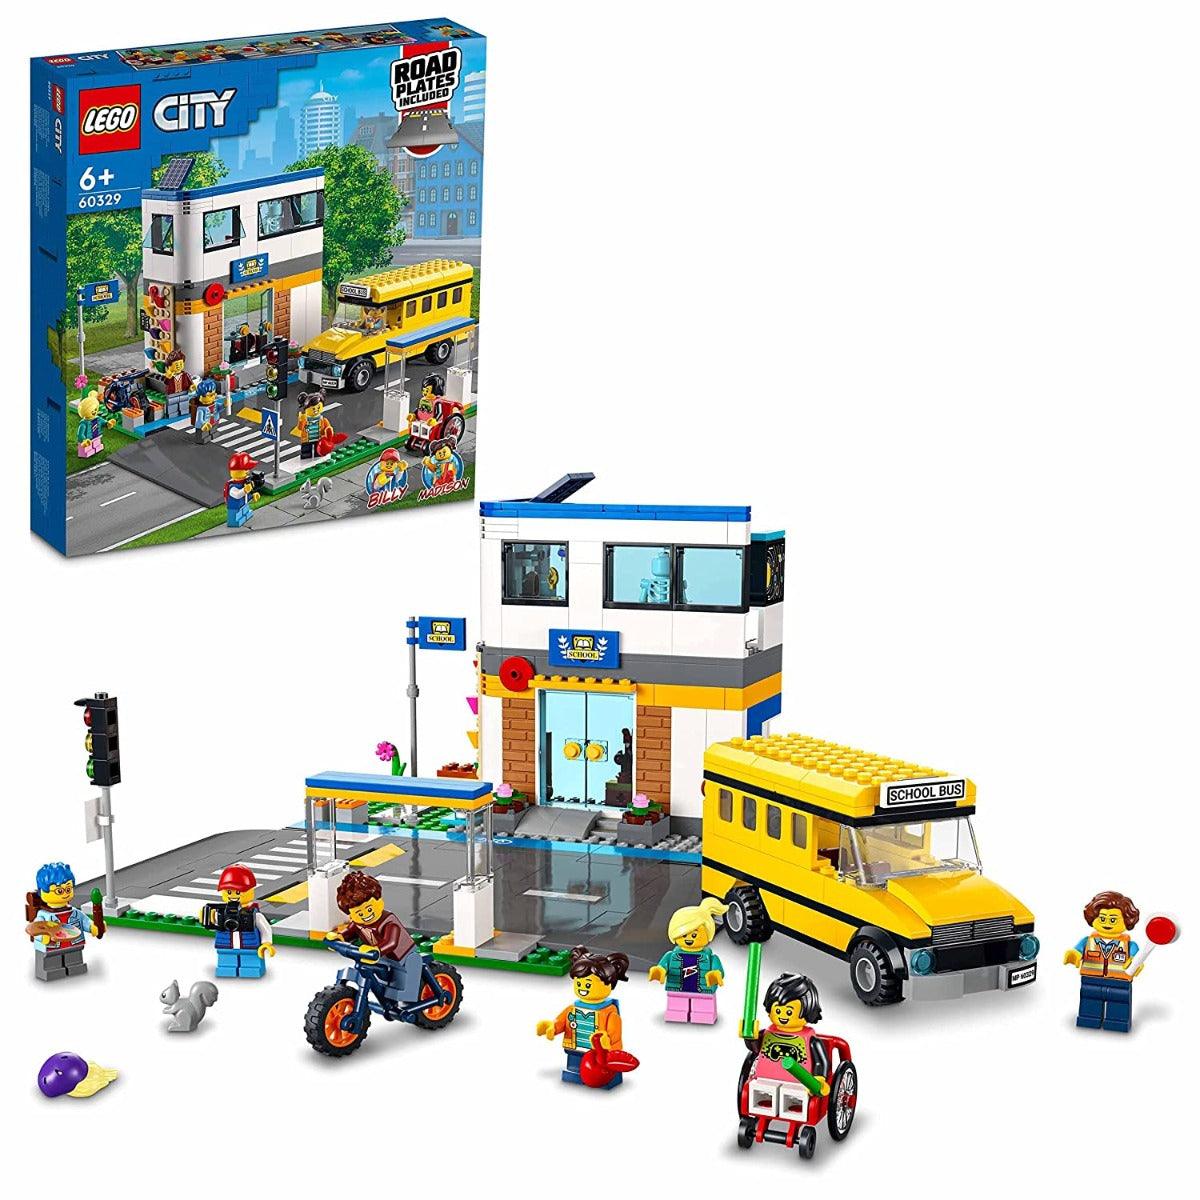 LEGO City School Day Building Kit for Ages 6+